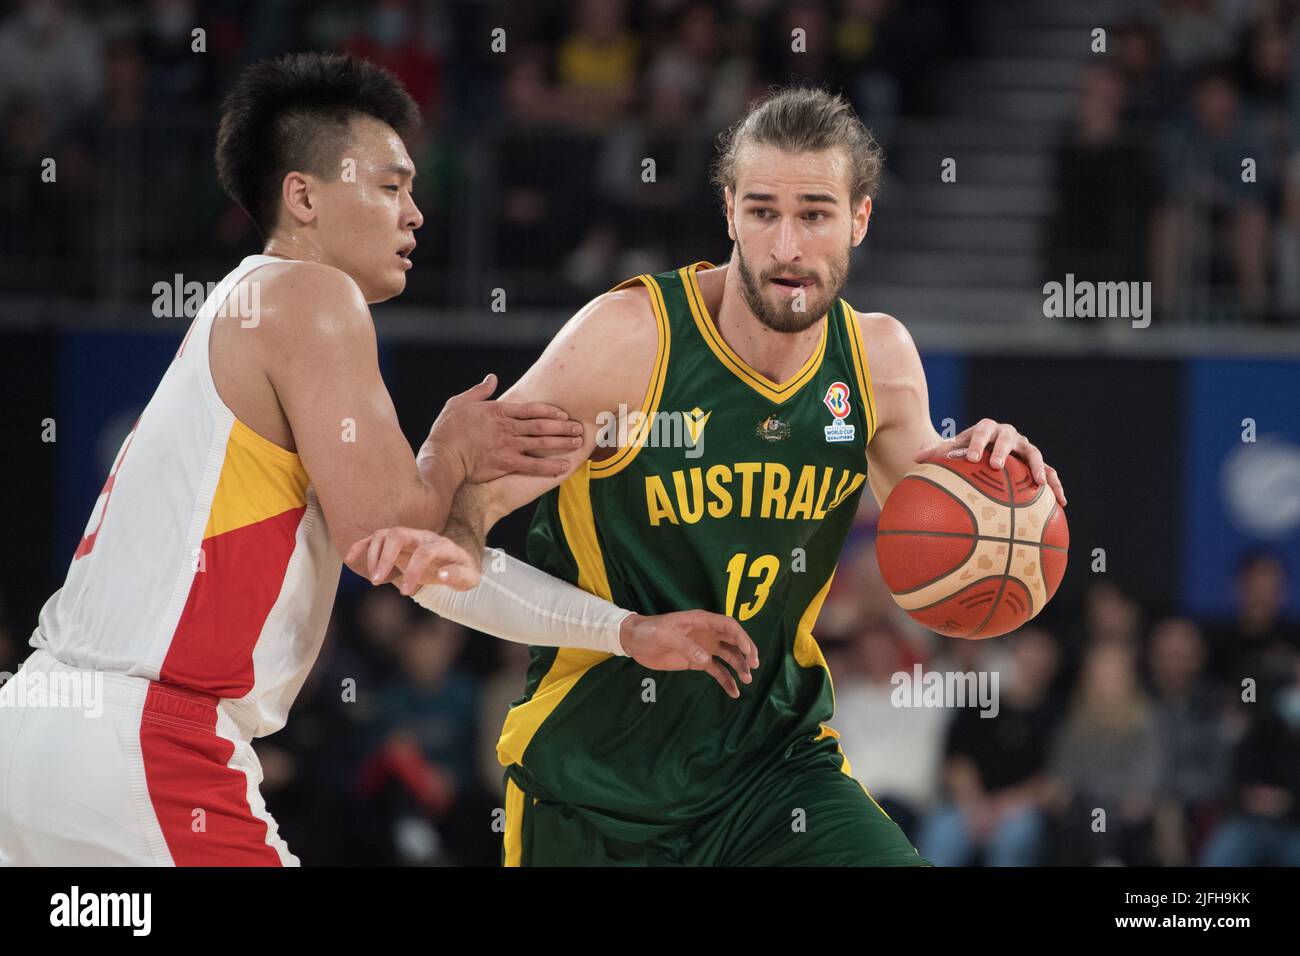 Melbourne, Australia. 03rd July, 2022. Rui Zhao (L) of China Basketball  team and Sam Froling (R) of Australia Basketball team in action during the  FIBA World Cup 2023 Qualifiers Group B Window